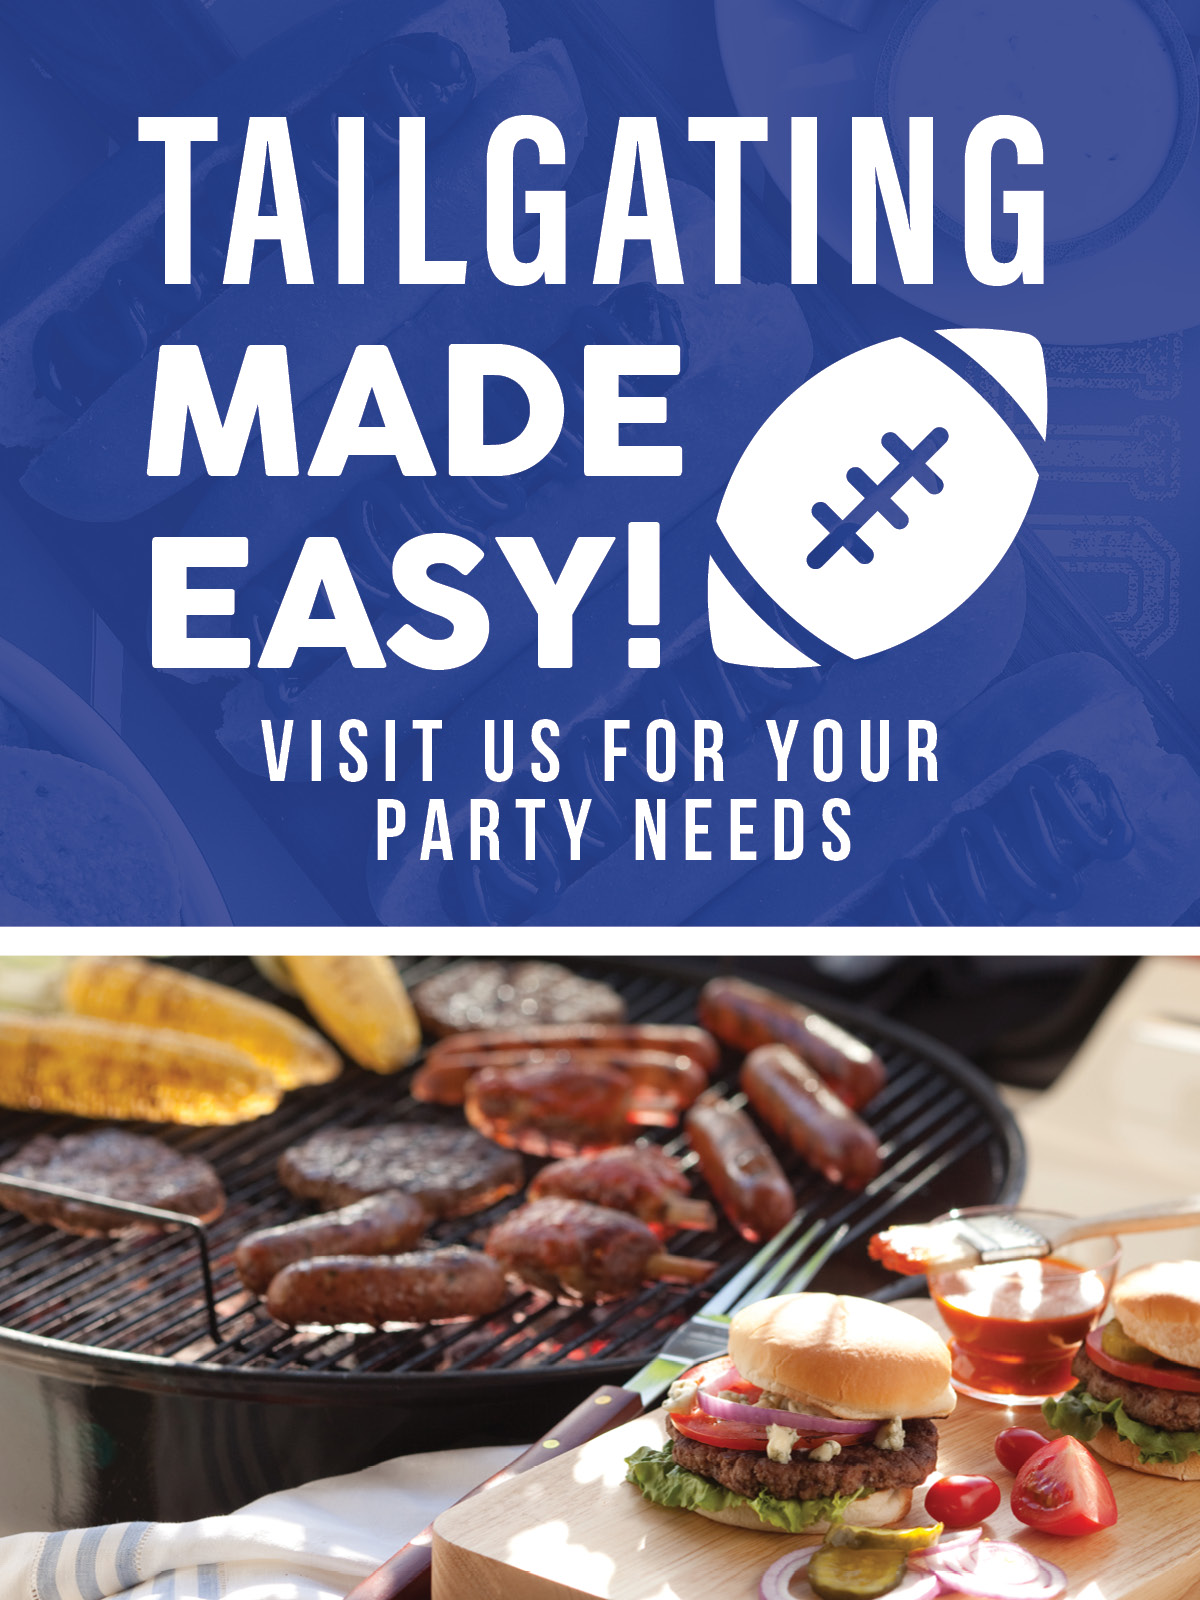 Visit us for your all of your favorite game items Grilling Hamburgers and Hot Dogs.